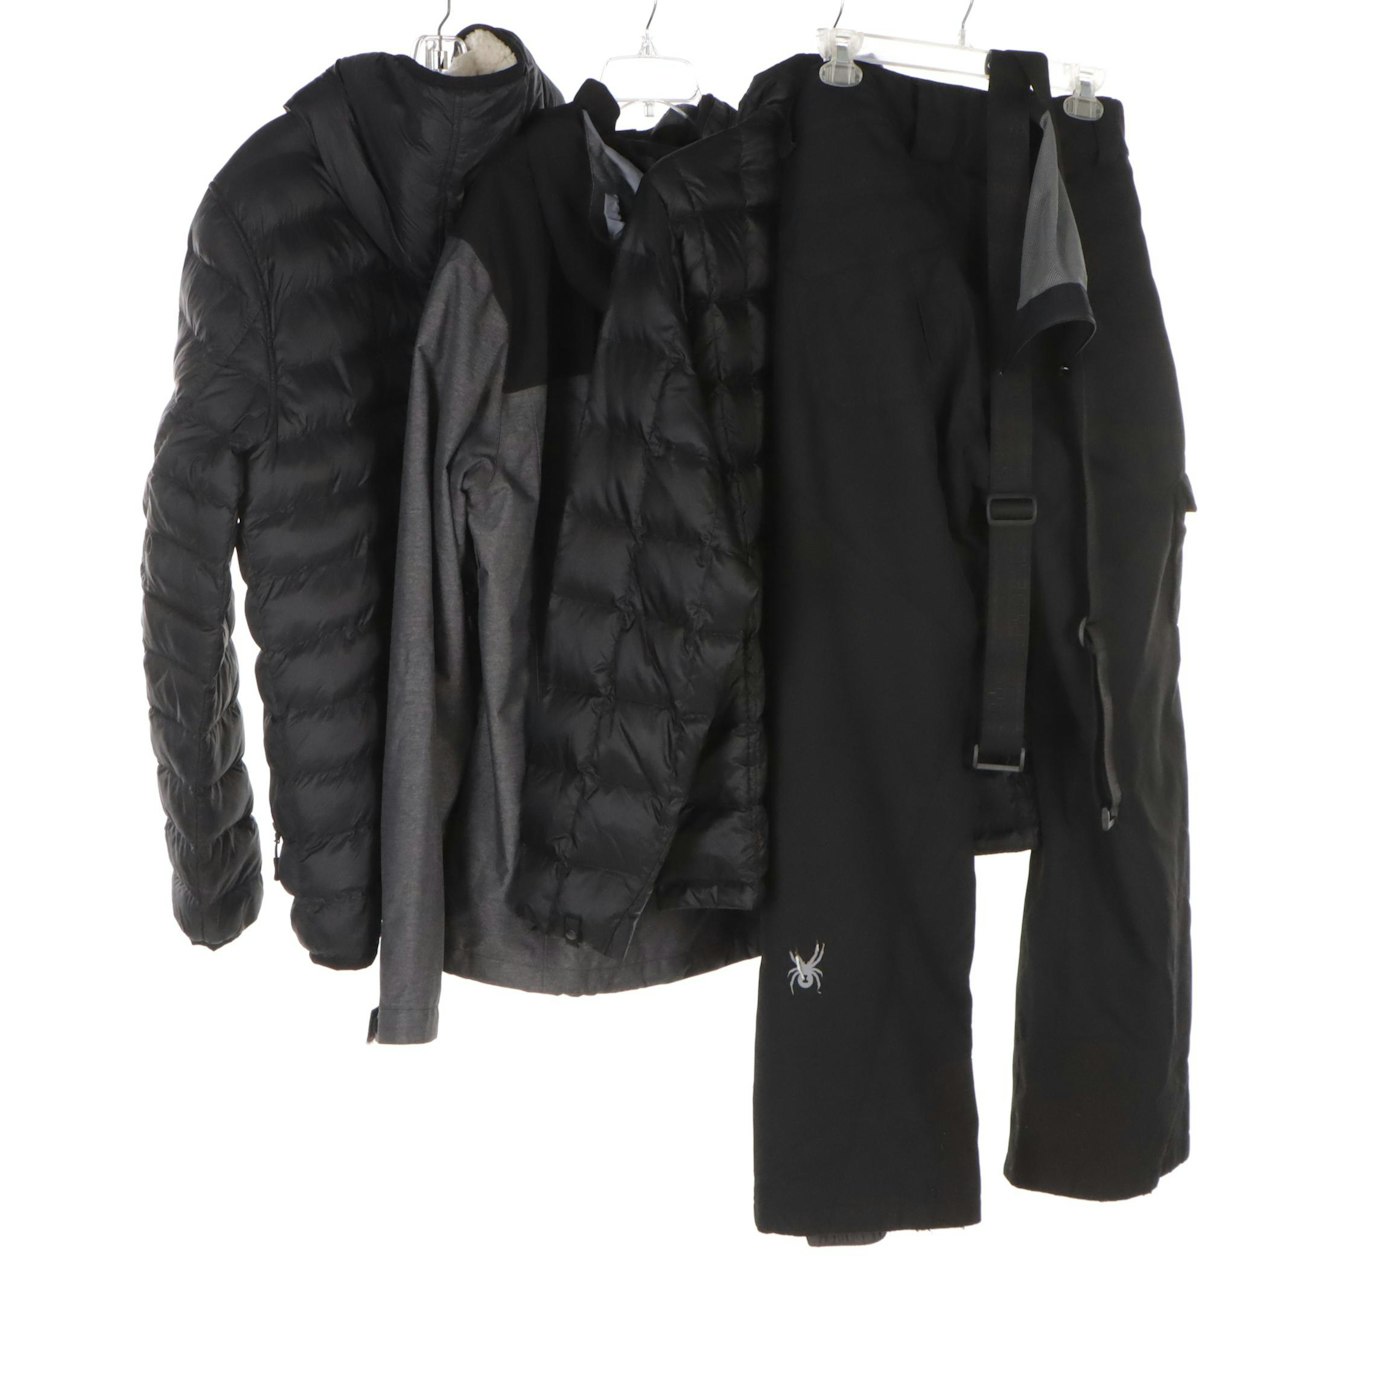 Men's The North Face Nylon Jacket & Quilted Puffer, Spyder Ski Pants ...